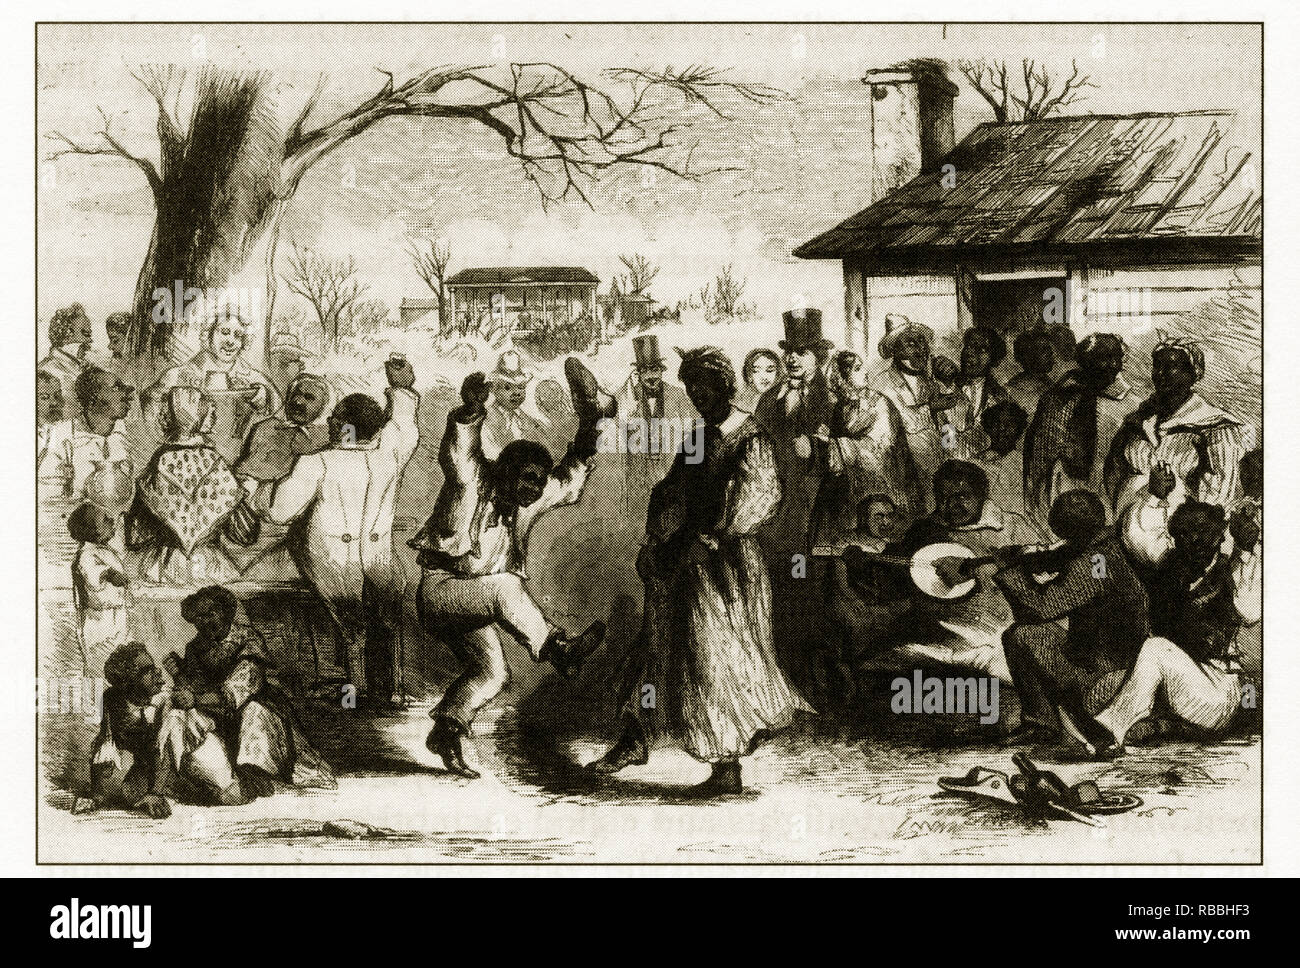 Antique Early American Engraving Depicting Social Issues, Circa 1850's Stock Photo